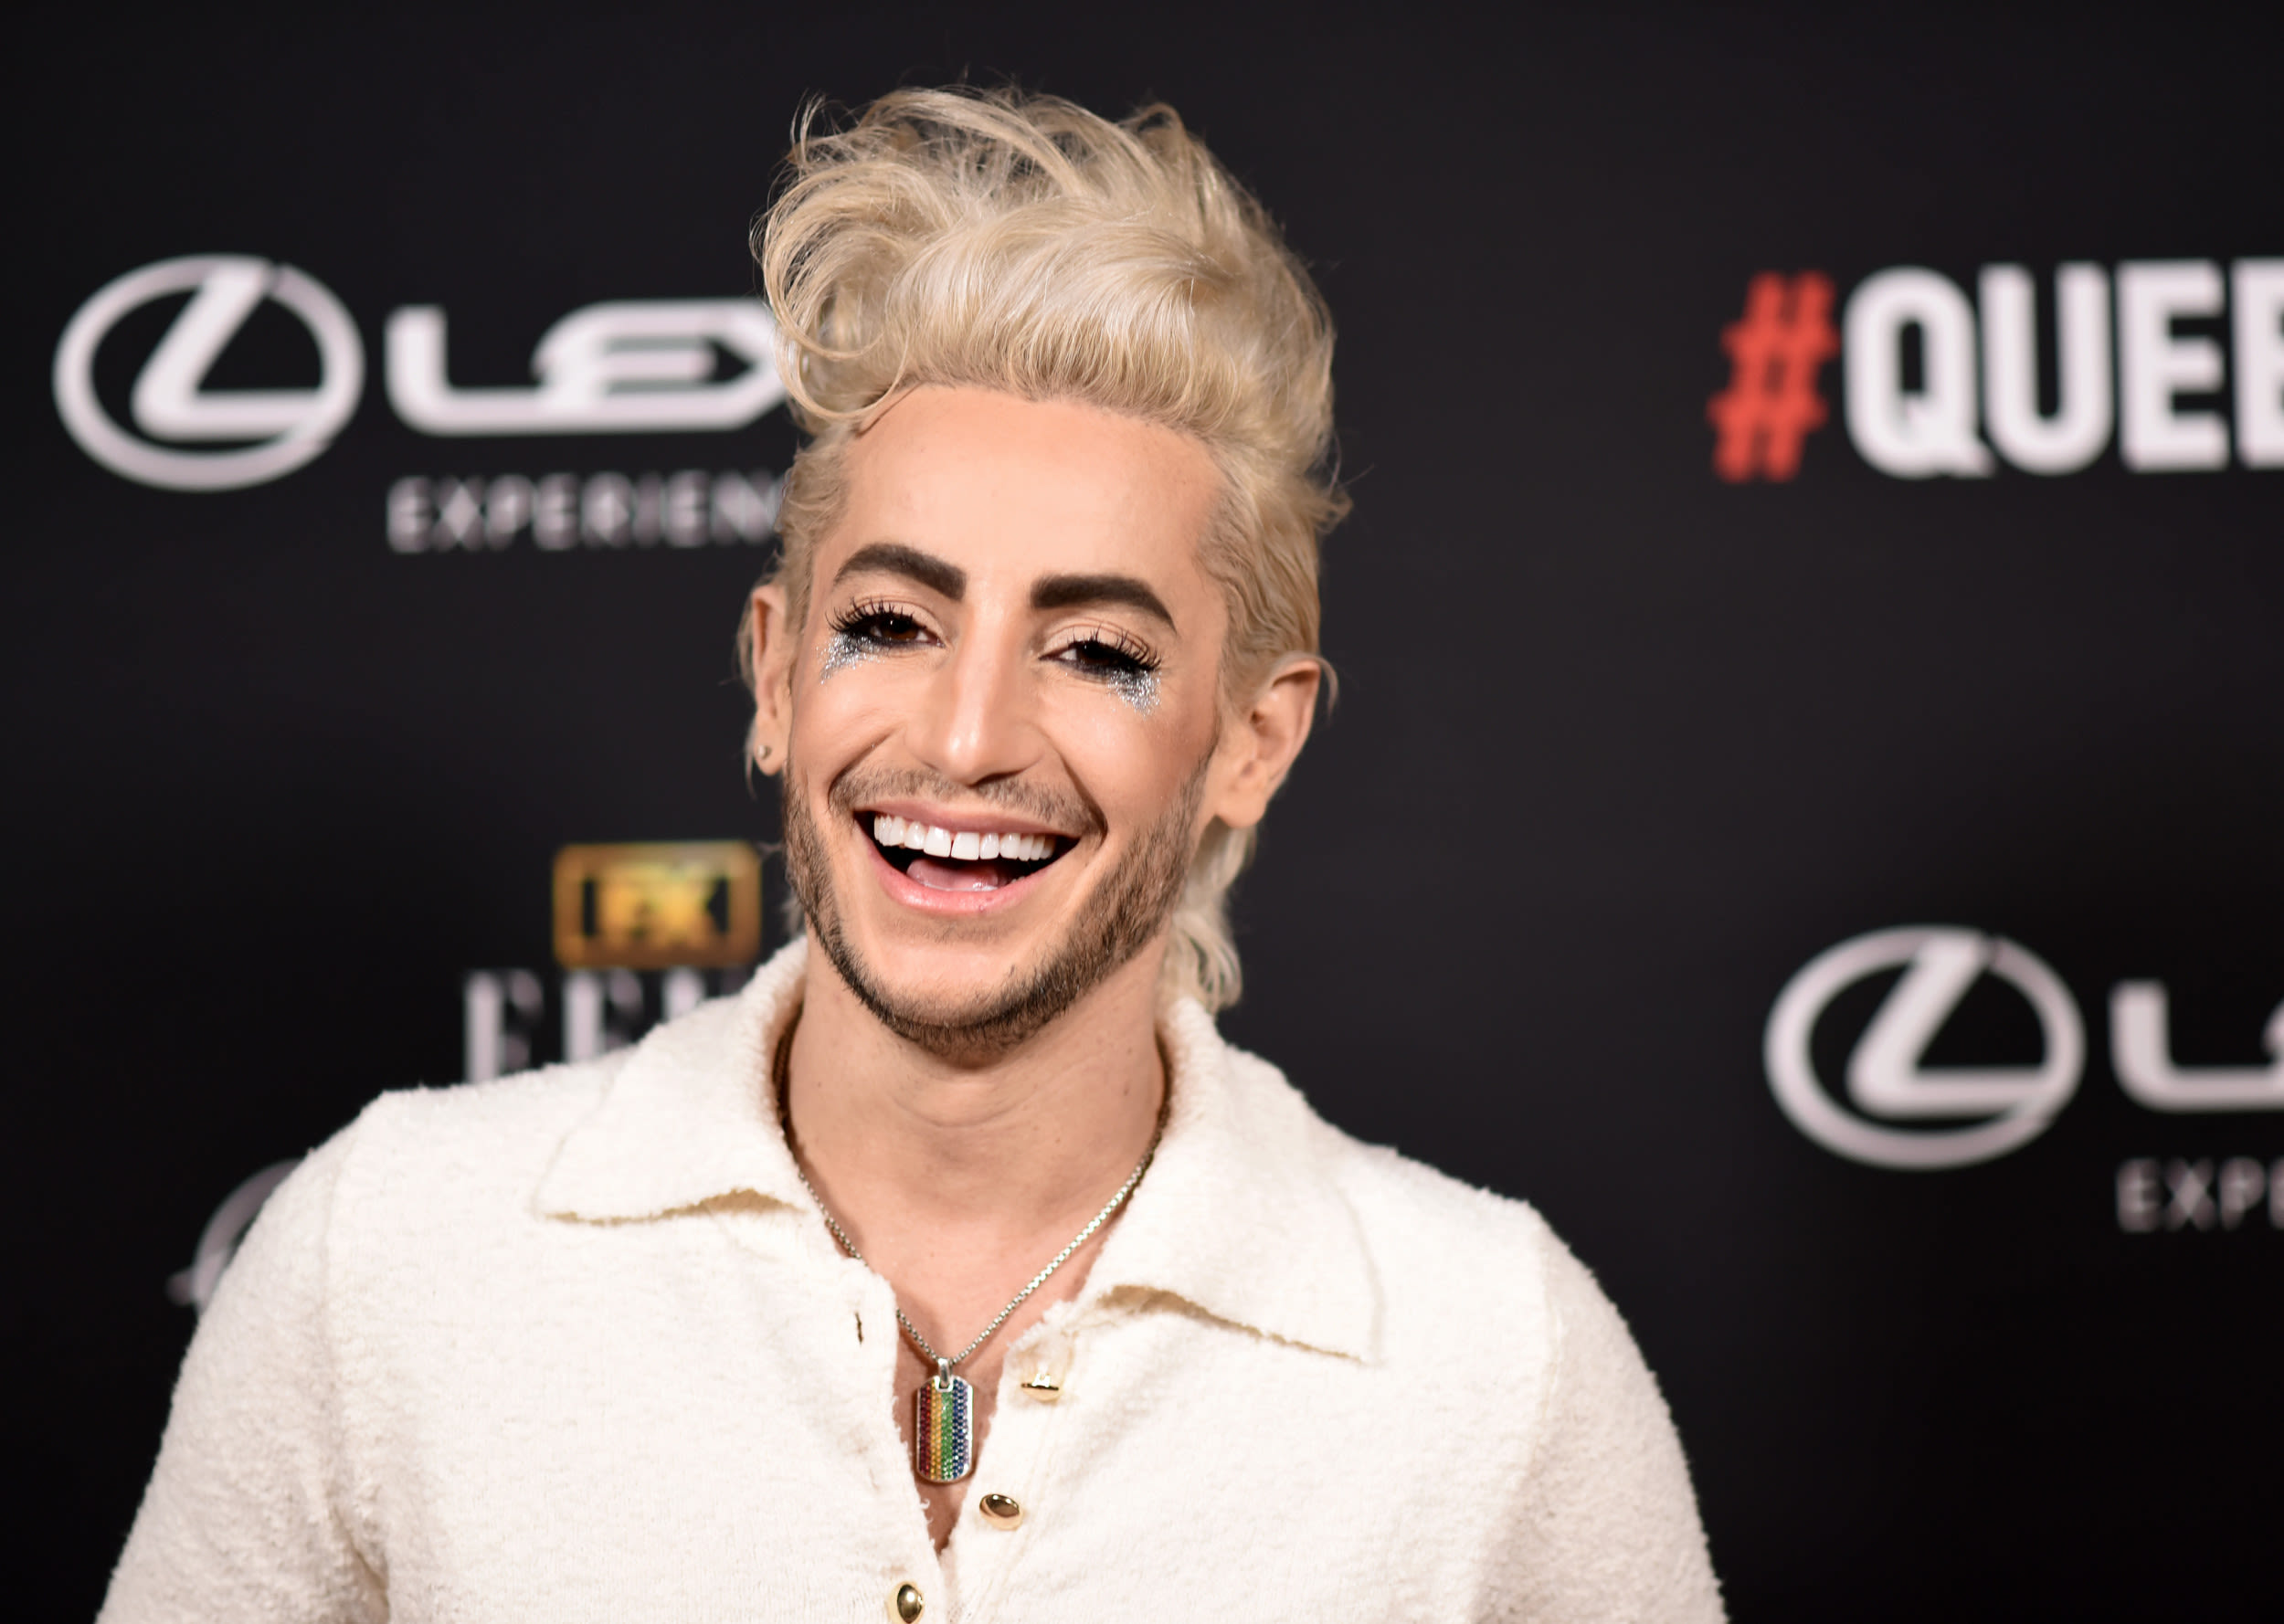 Frankie Grande responds to bizarre cannibalism rumors about sister Ariana